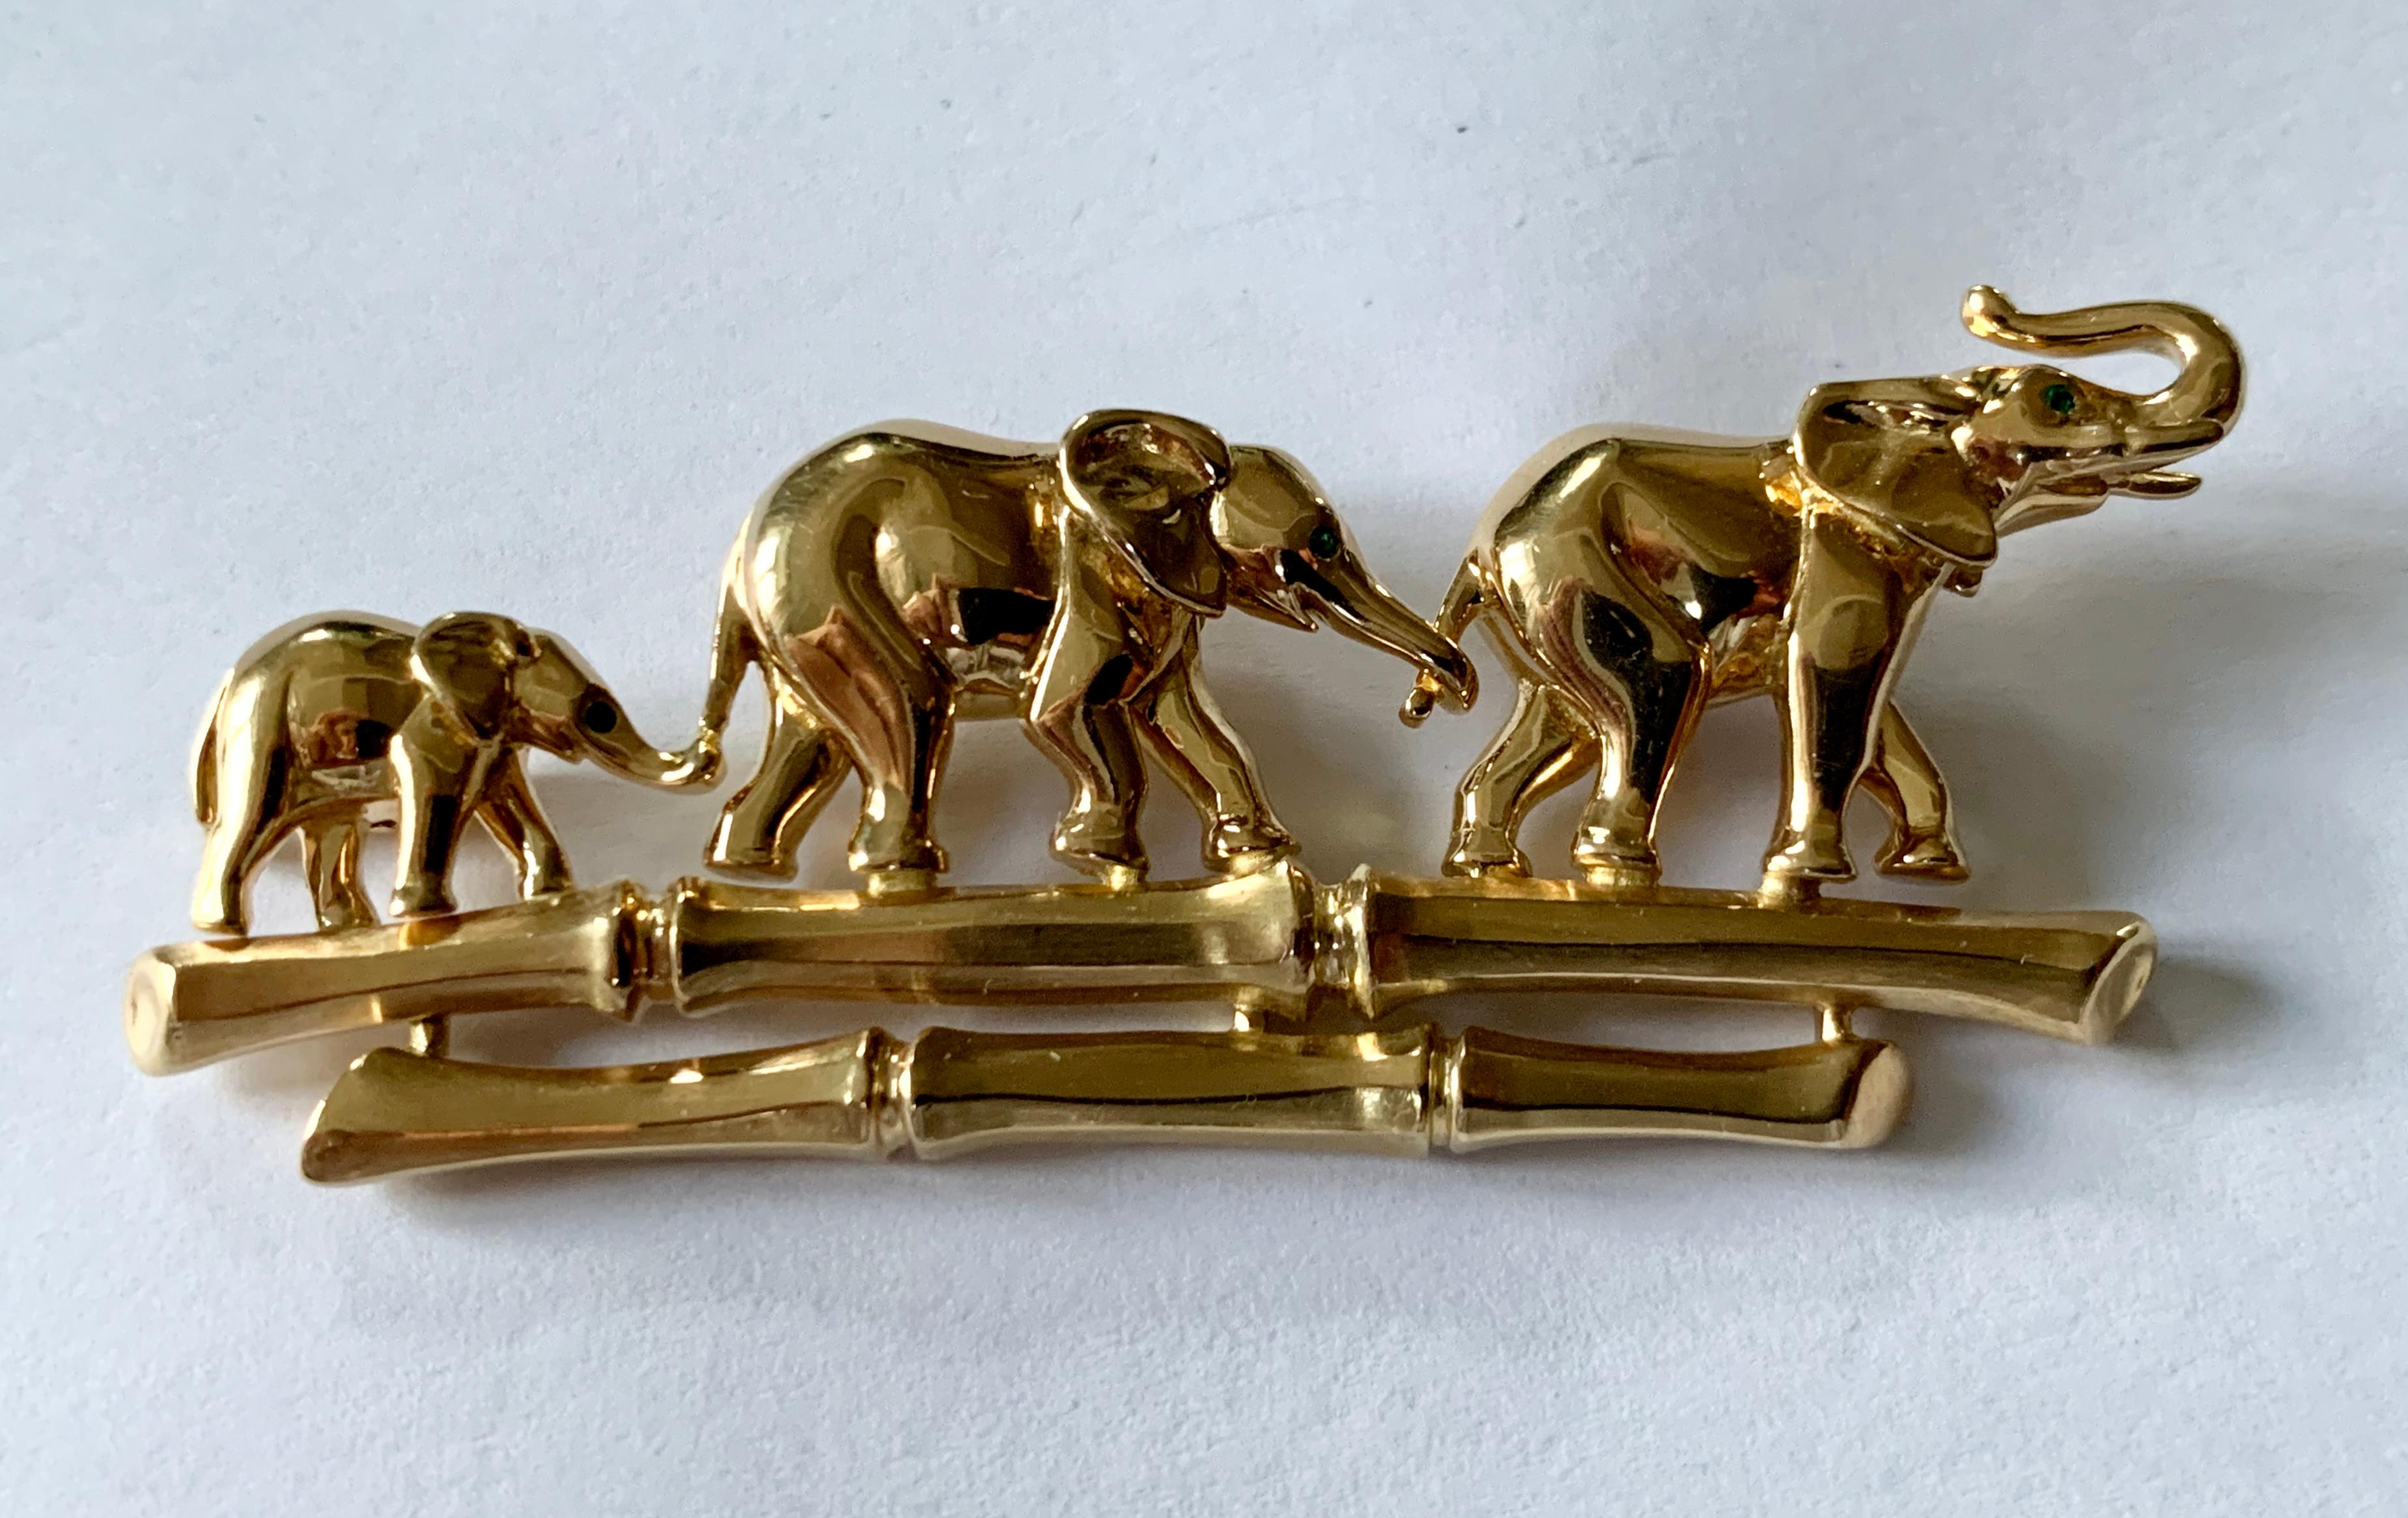 Brooch around 1980, esigned as a family of elephants walking along a bamboo path, of polished and brushed design in soid 18 K yellow Gold, all elephants with a circular-cut emerald eye, signed Cartier, numbered  651049, maker's mark, French assay